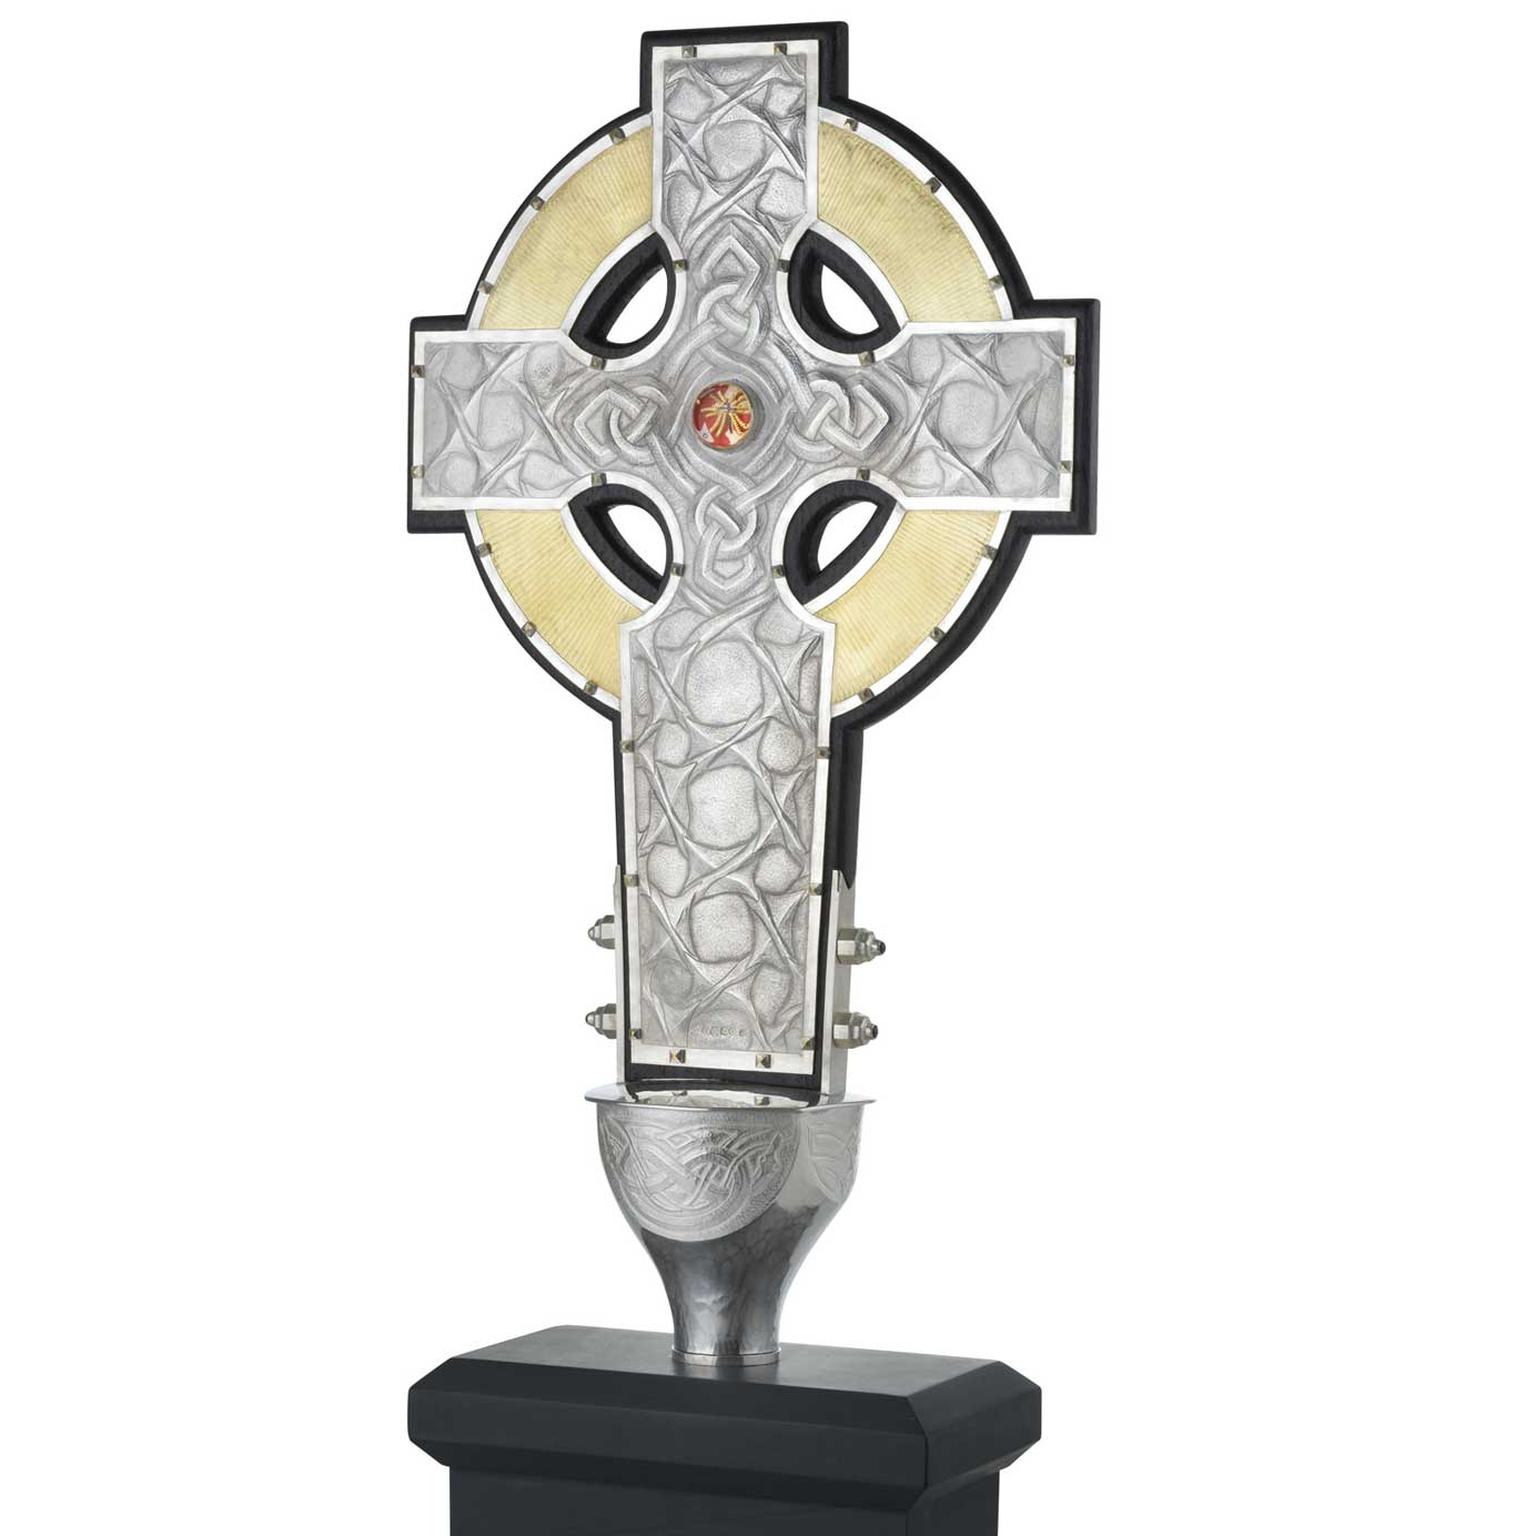 The Cross of Wales with True Cross relic The Goldsmiths Company Richard Valencia